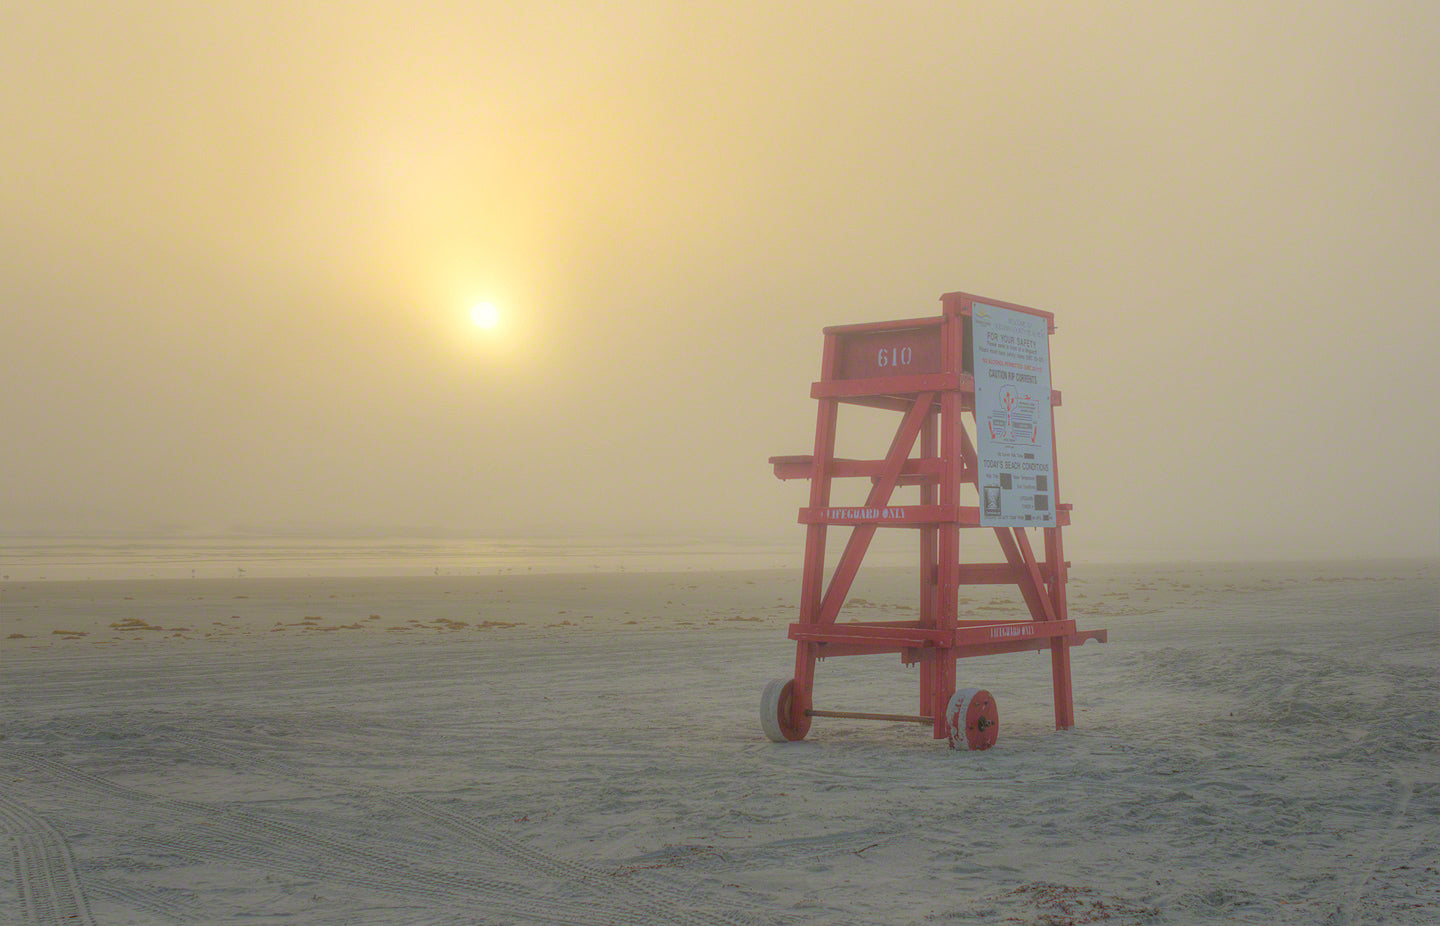 A photo of a red life guard stand on the beach